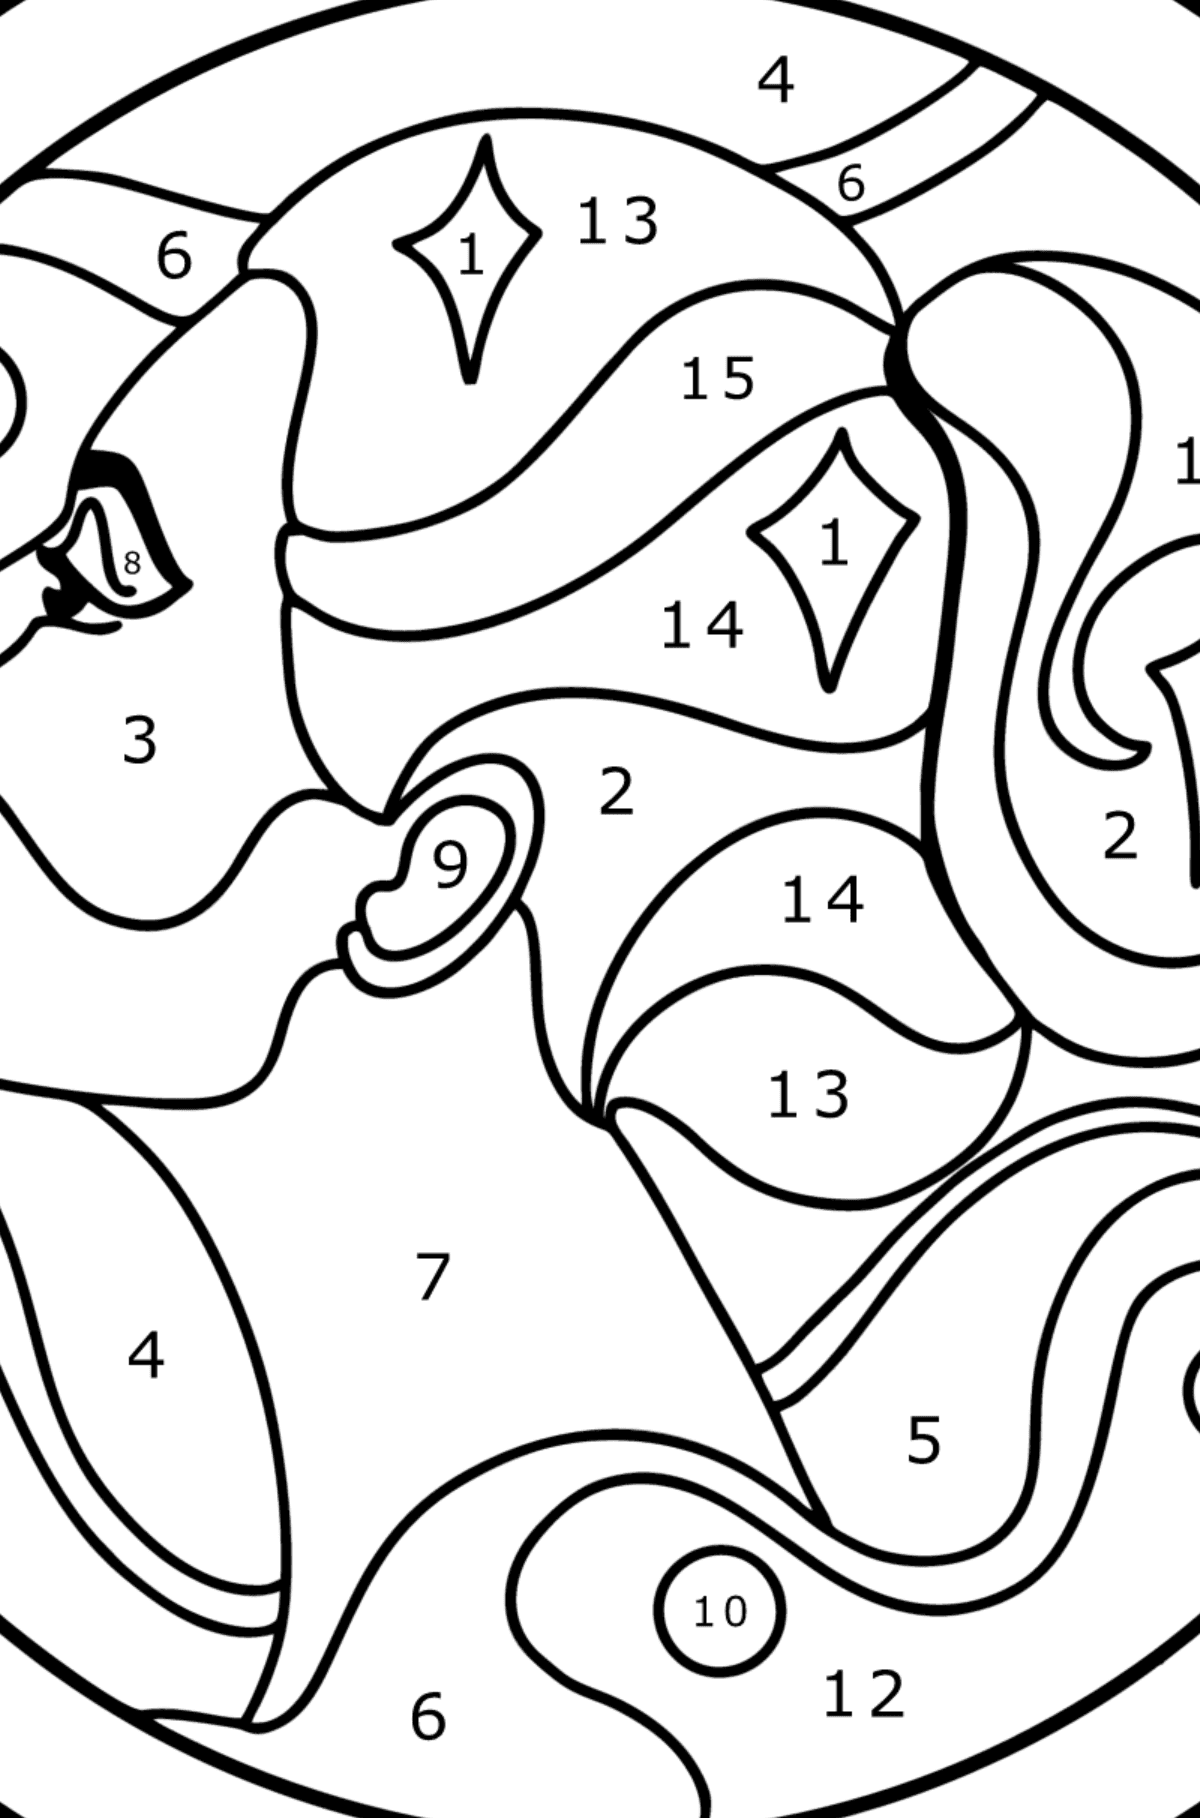 Coloring page for kids - zodiac sign Virgo - Coloring by Numbers for Kids